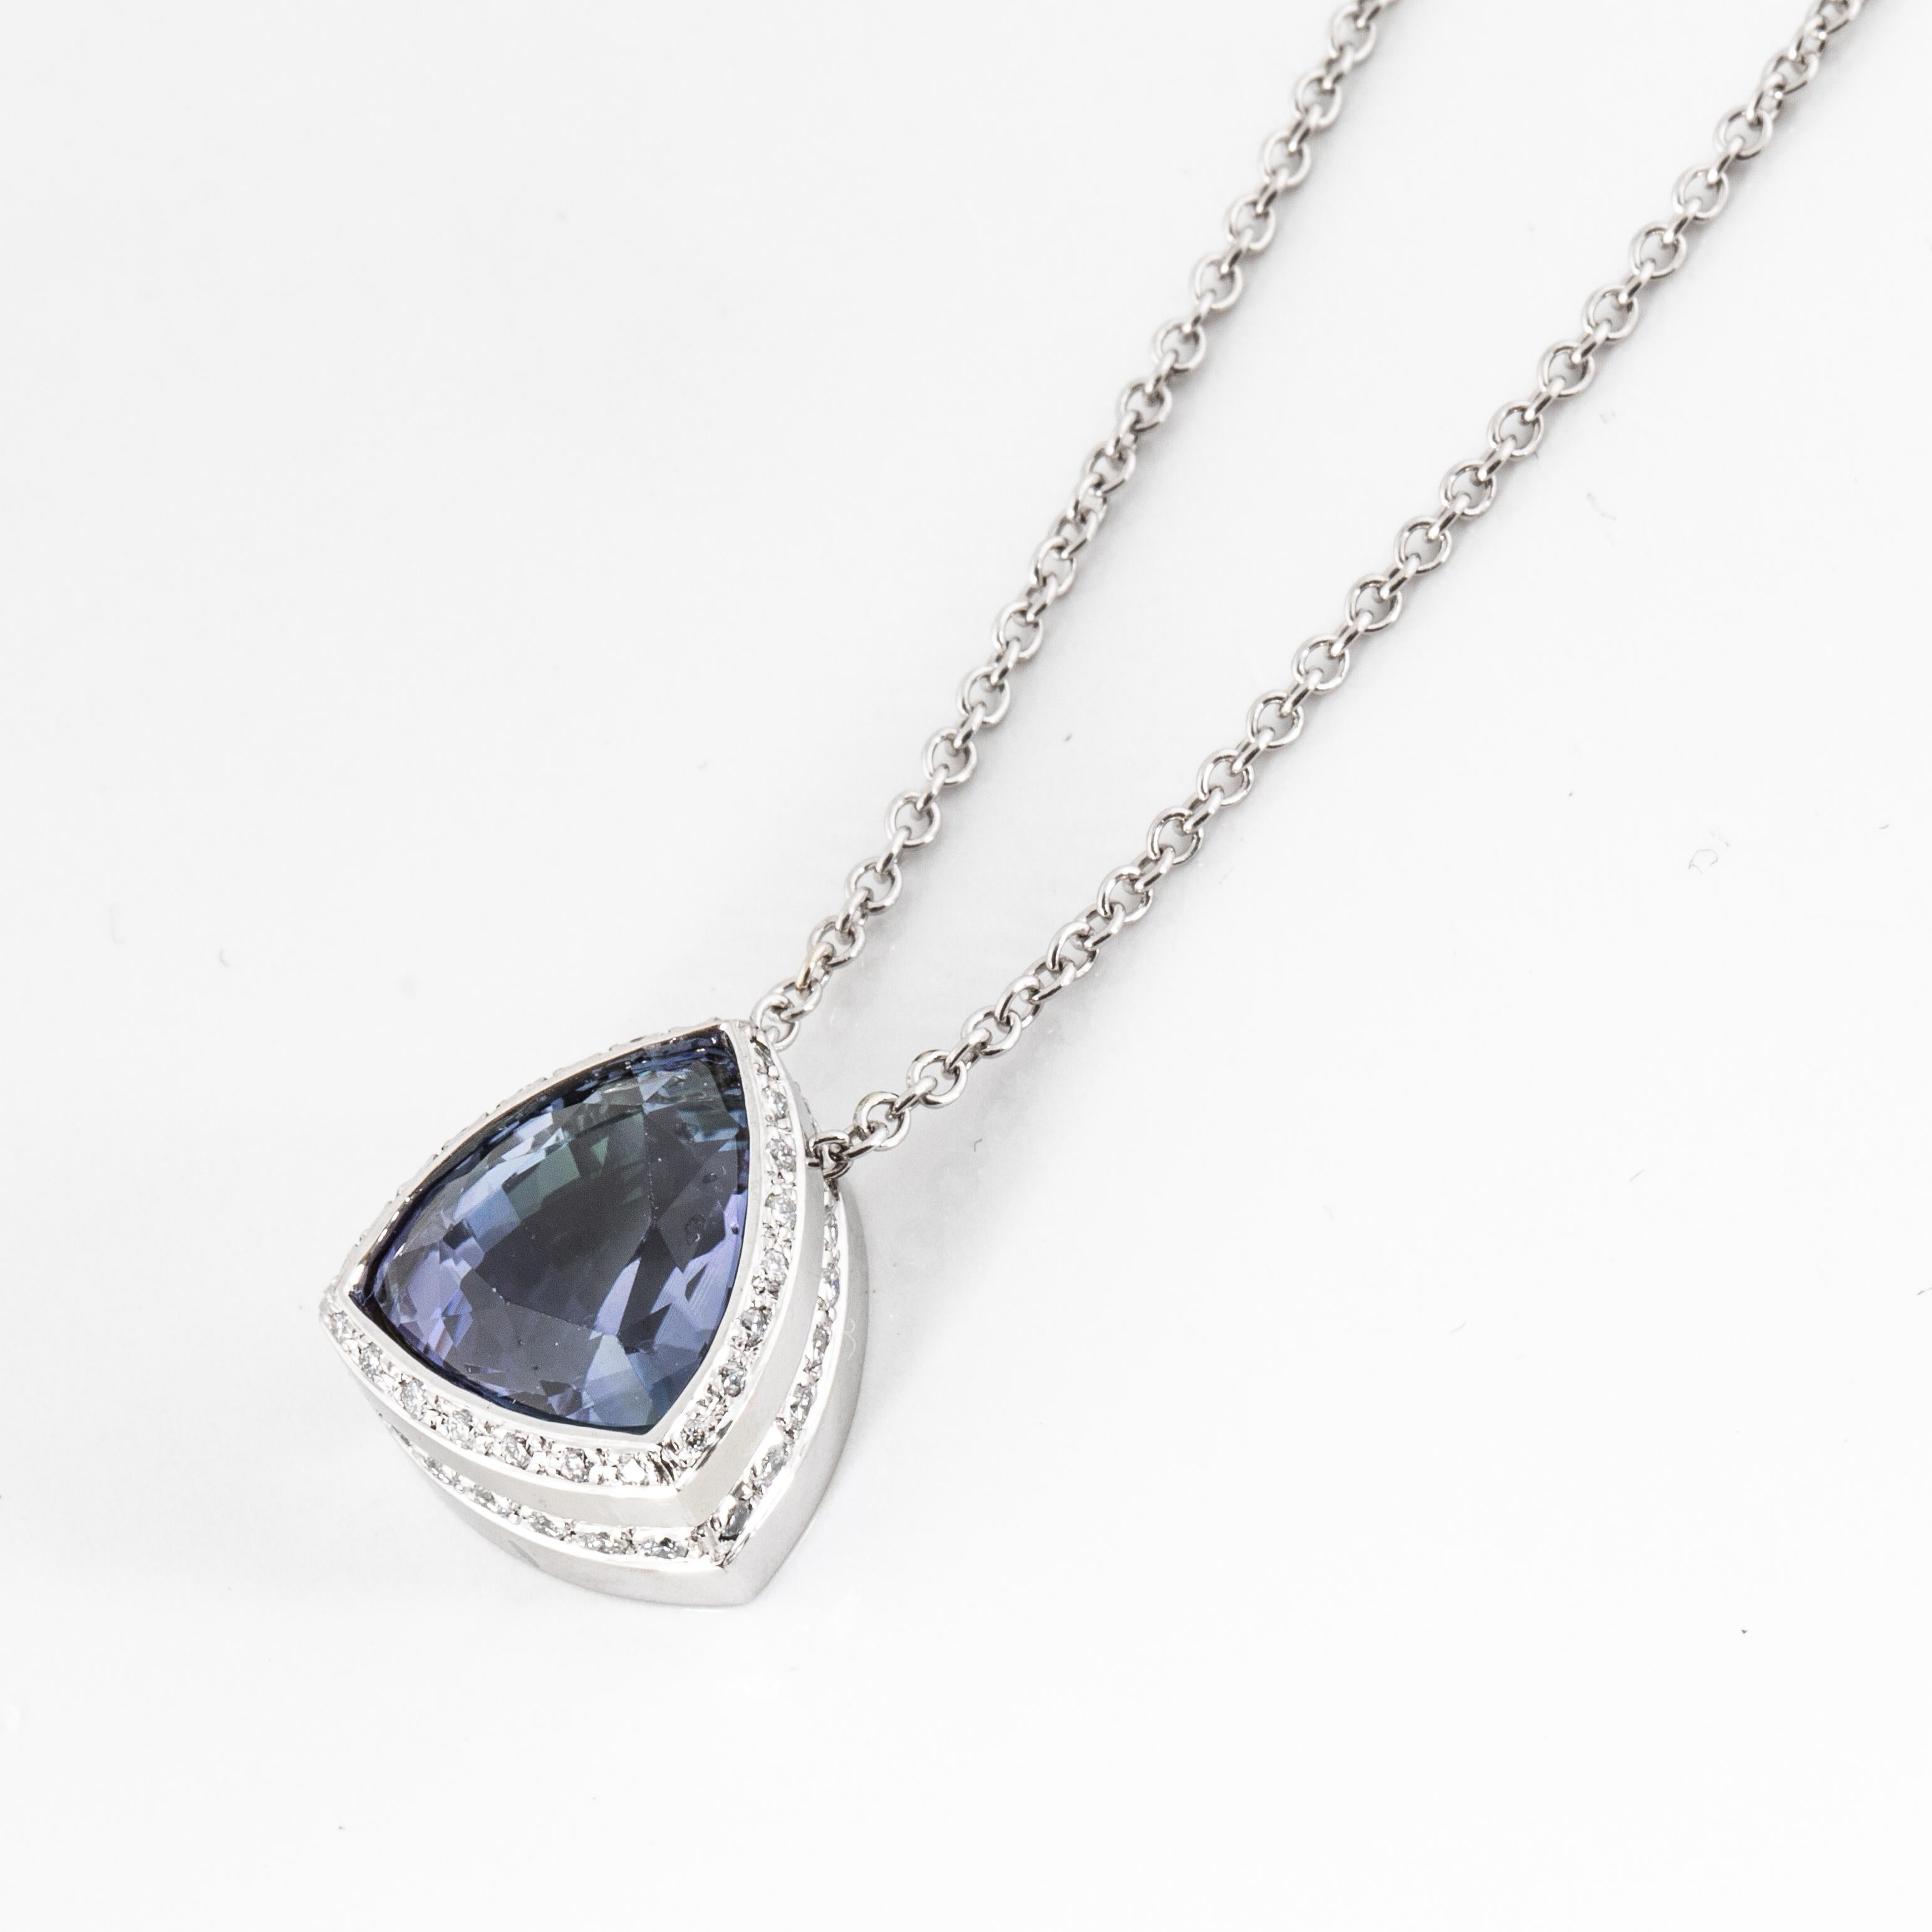 18K white gold pendant necklace featuring a triangular tanzanite with a diamond halo.  The tanzanite totals 5 carats.  There are 44 round brilliant-cut diamonds that total 0.35 carats; G-H color and VS clarity.  The chain is 14K white gold and